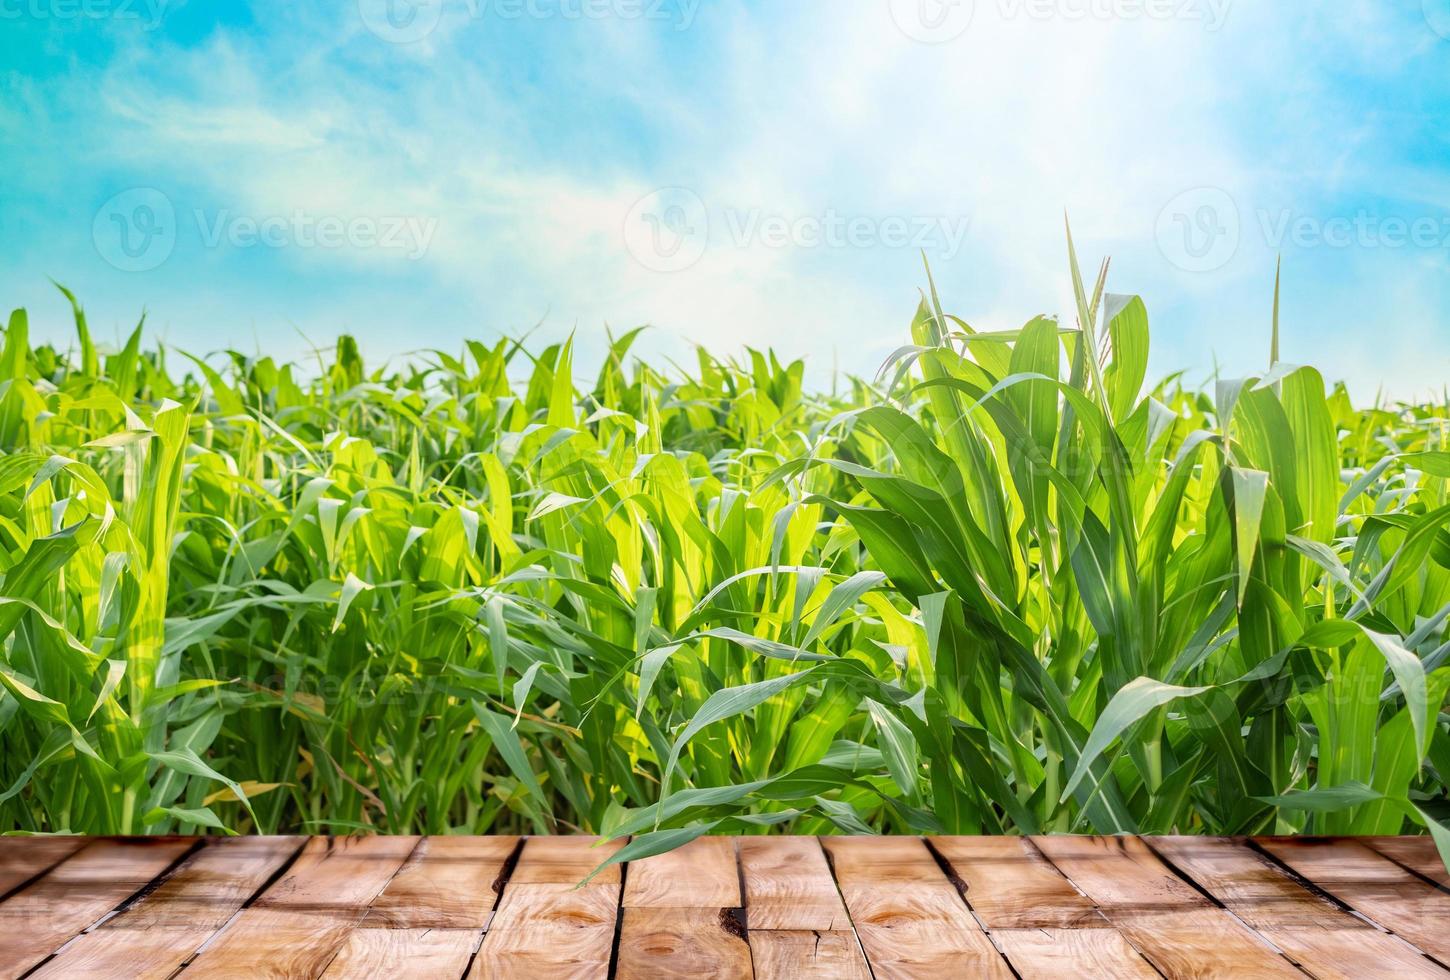 Beautiful  wooden table floor with green corn field nature and blue sky with sunlight background, agriculture product standing showcase background photo